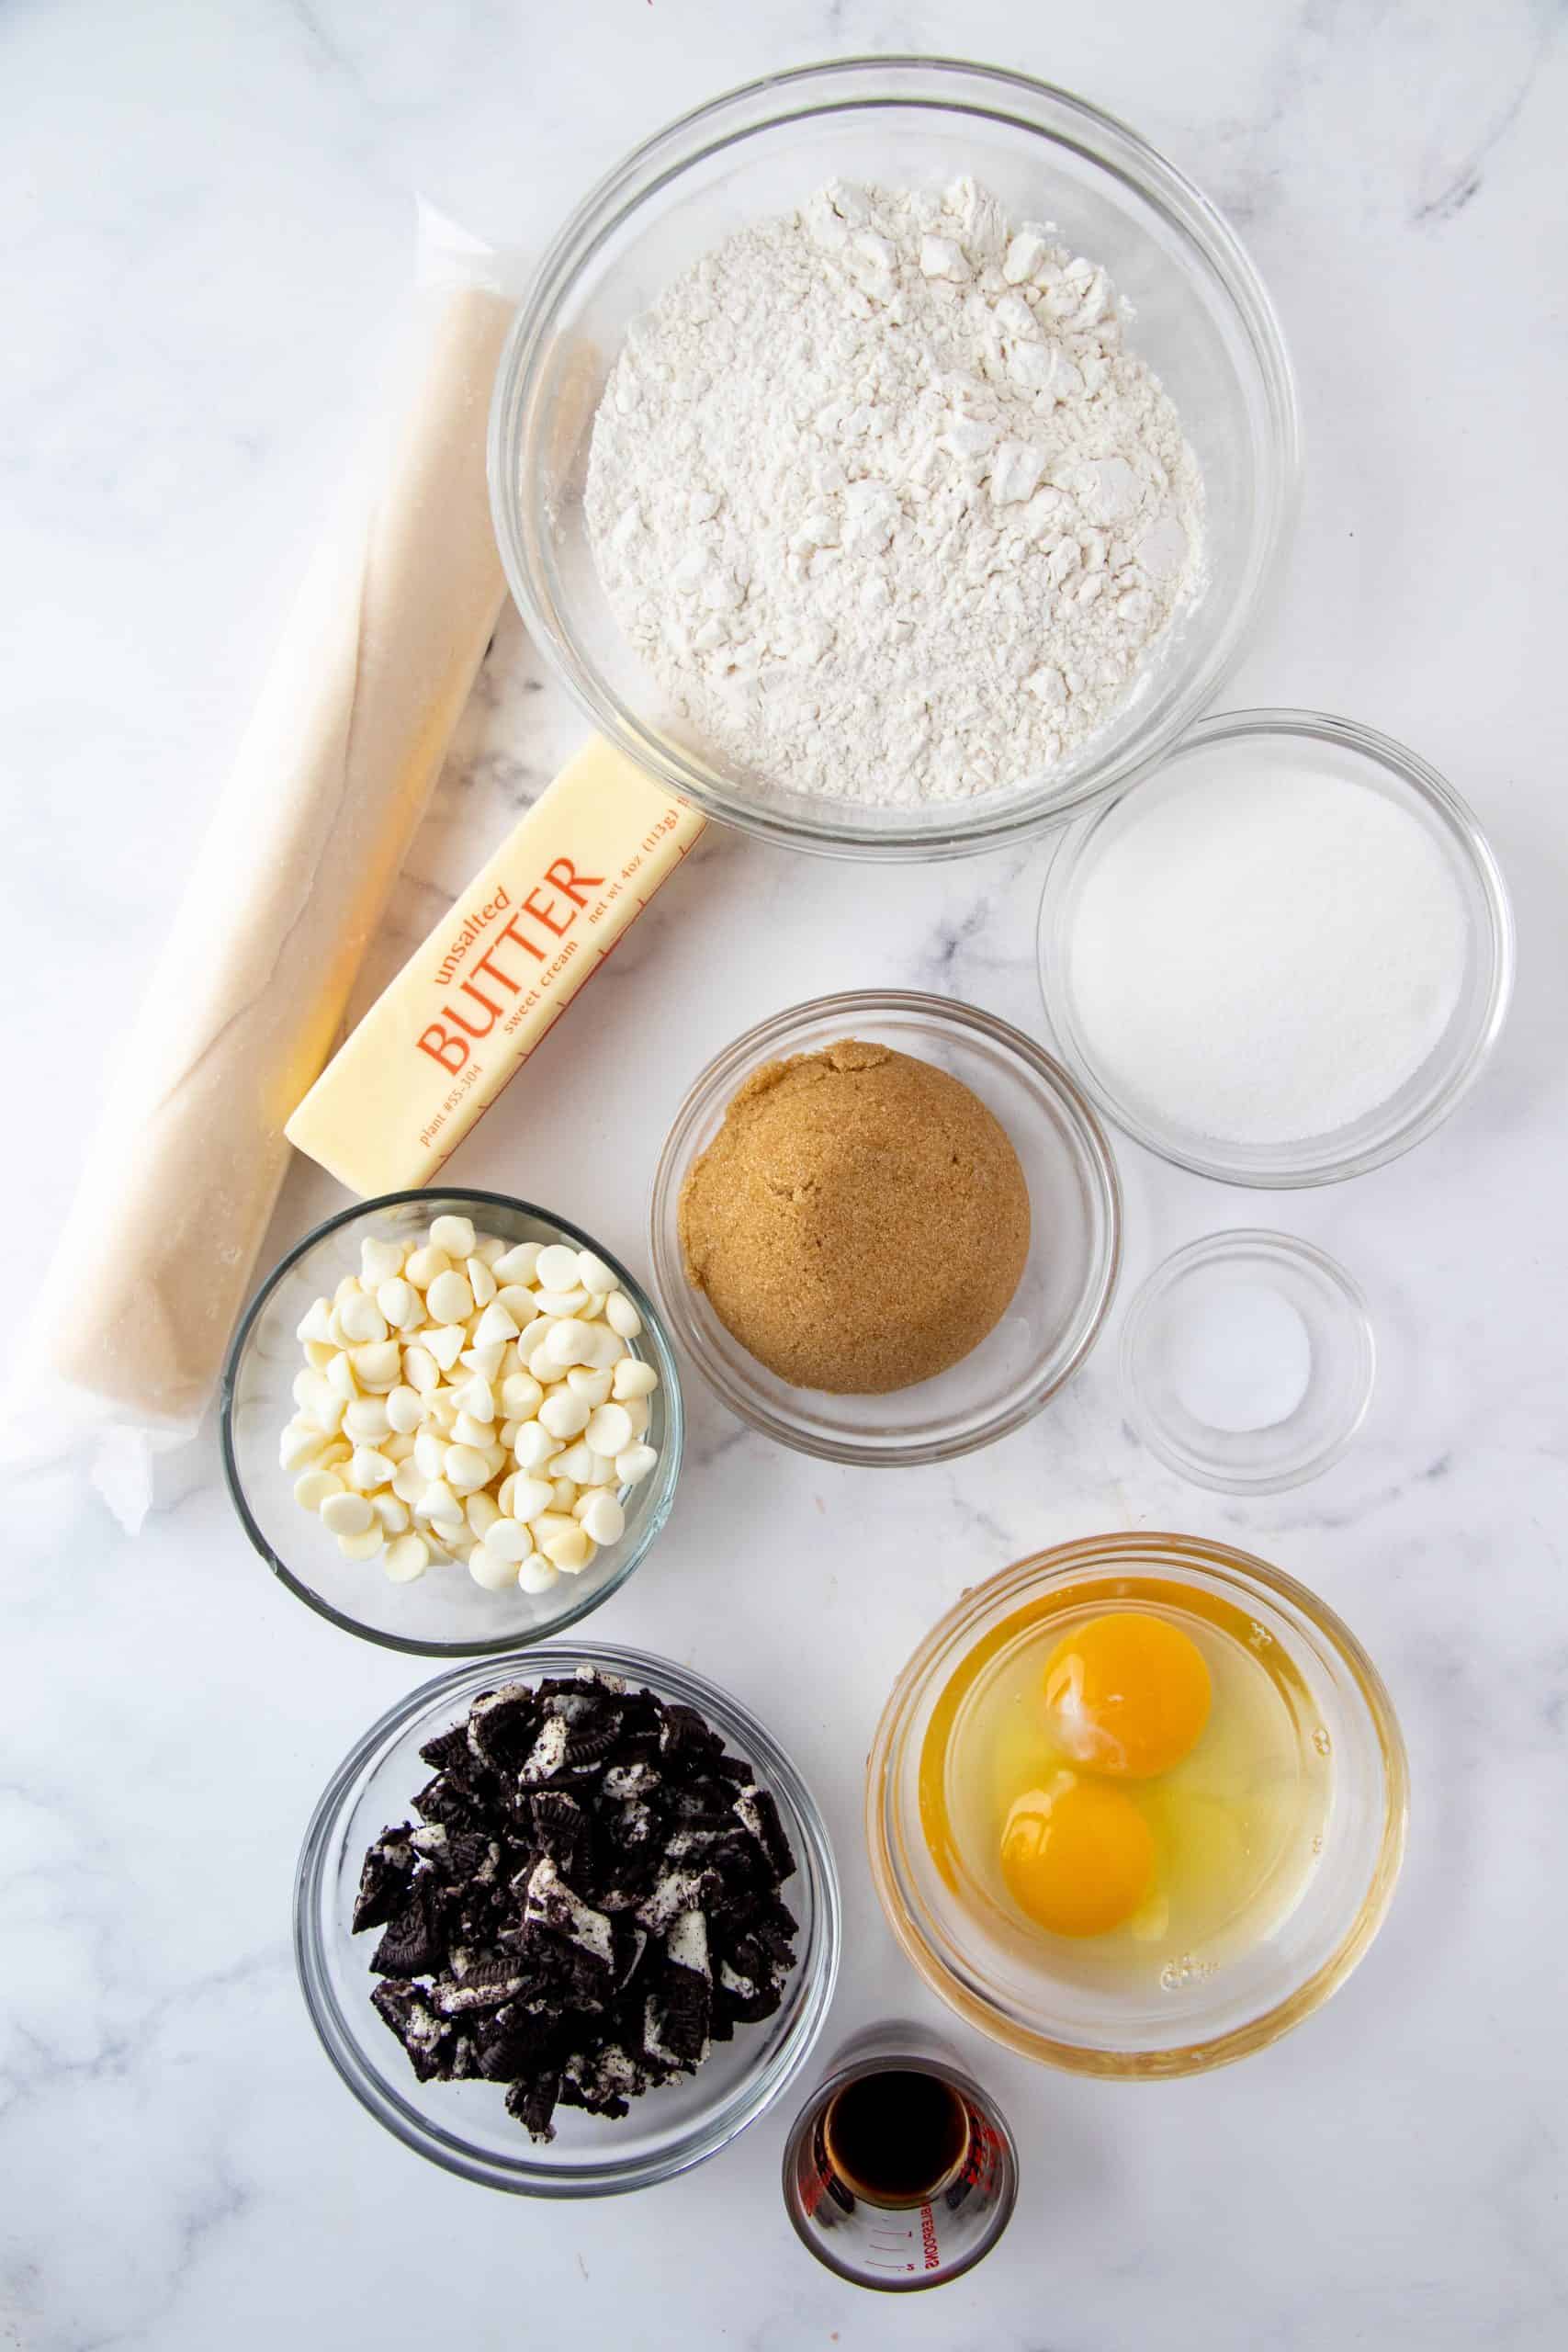 Ingredients needed to make Oreo Cookie Pie: refrigerated pie crust, unsalted butter, brown sugar, granulated sugar, eggs, vanilla extract, salt, all-purpose flour, Oreo cookies, white chocolate chips.